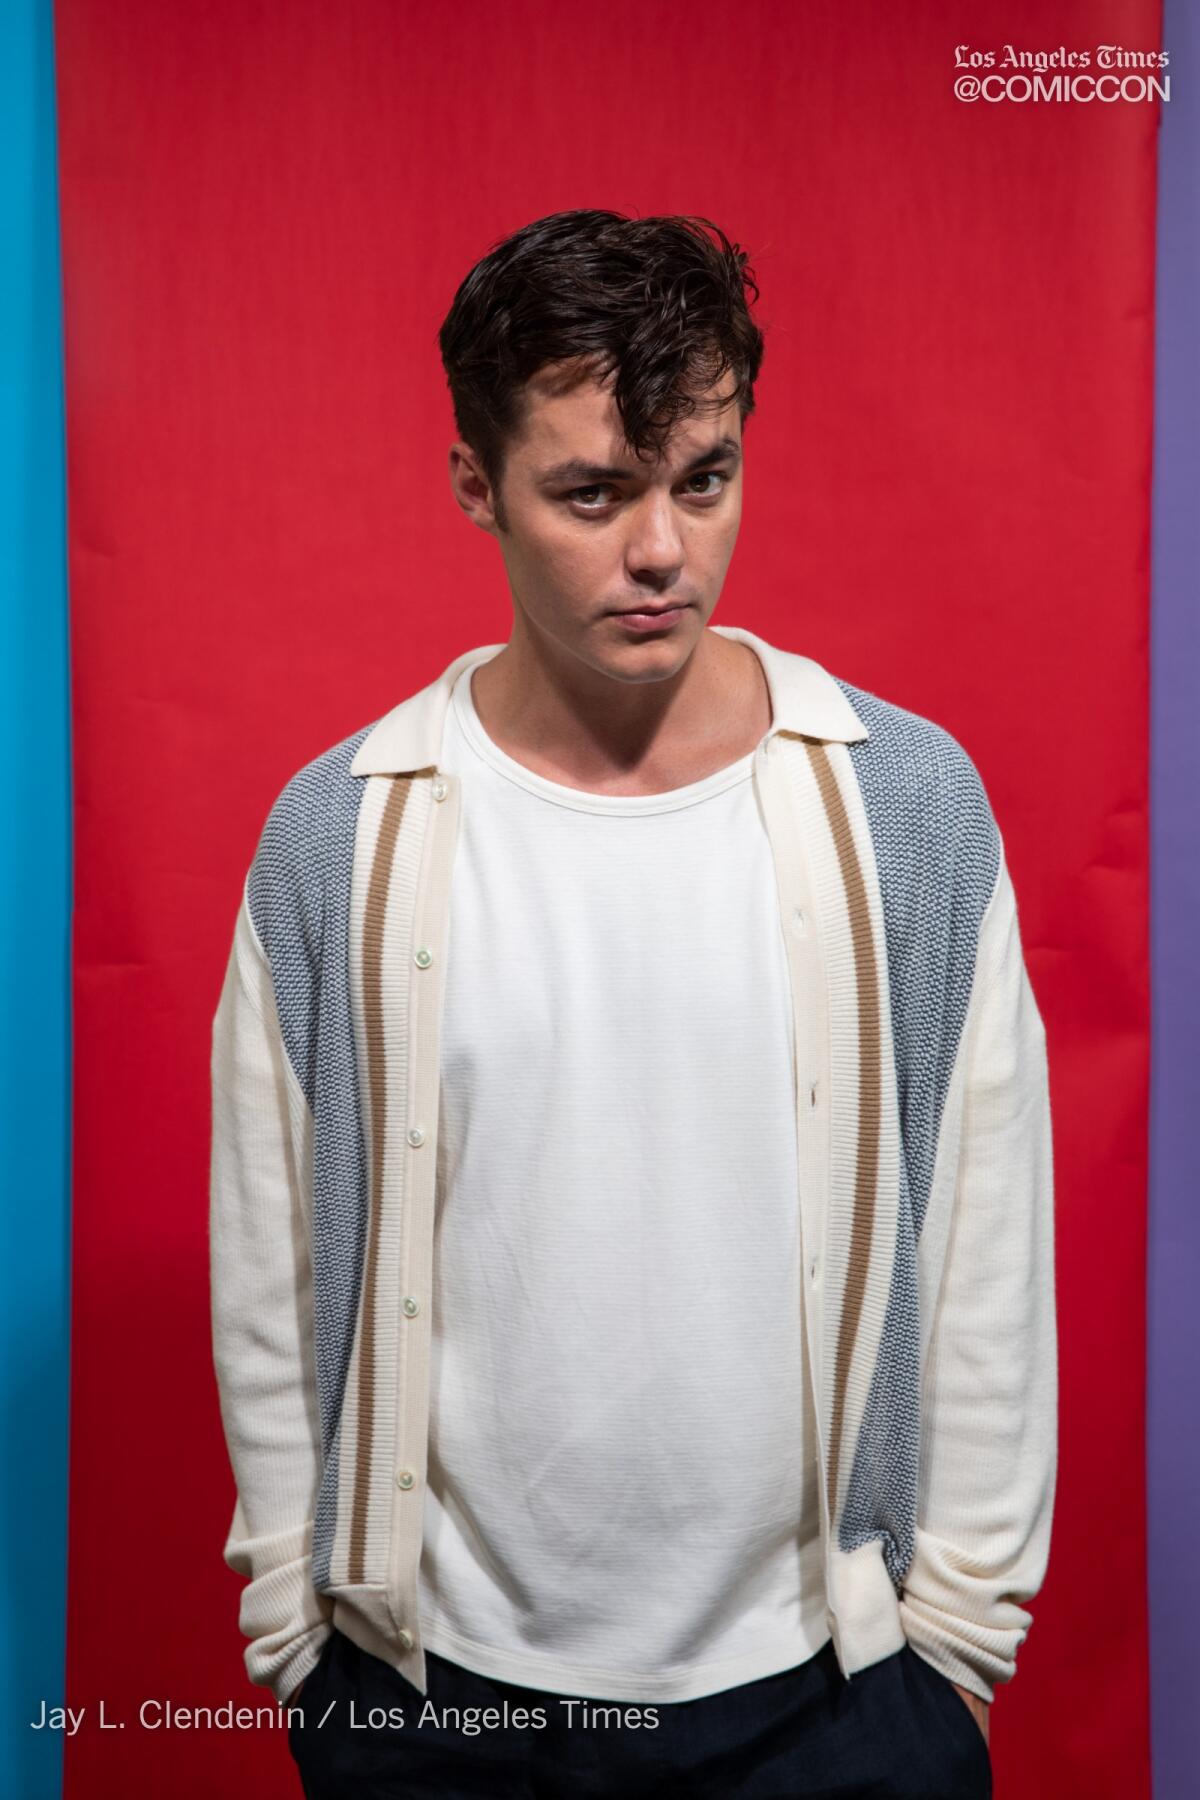 Actor Jack Bannon from the television series, "Pennyworth," photographed at the L.A. Times Photo and Video Studio at Comic-Con International on Friday, July 19, 2019 in San Diego, Calif.